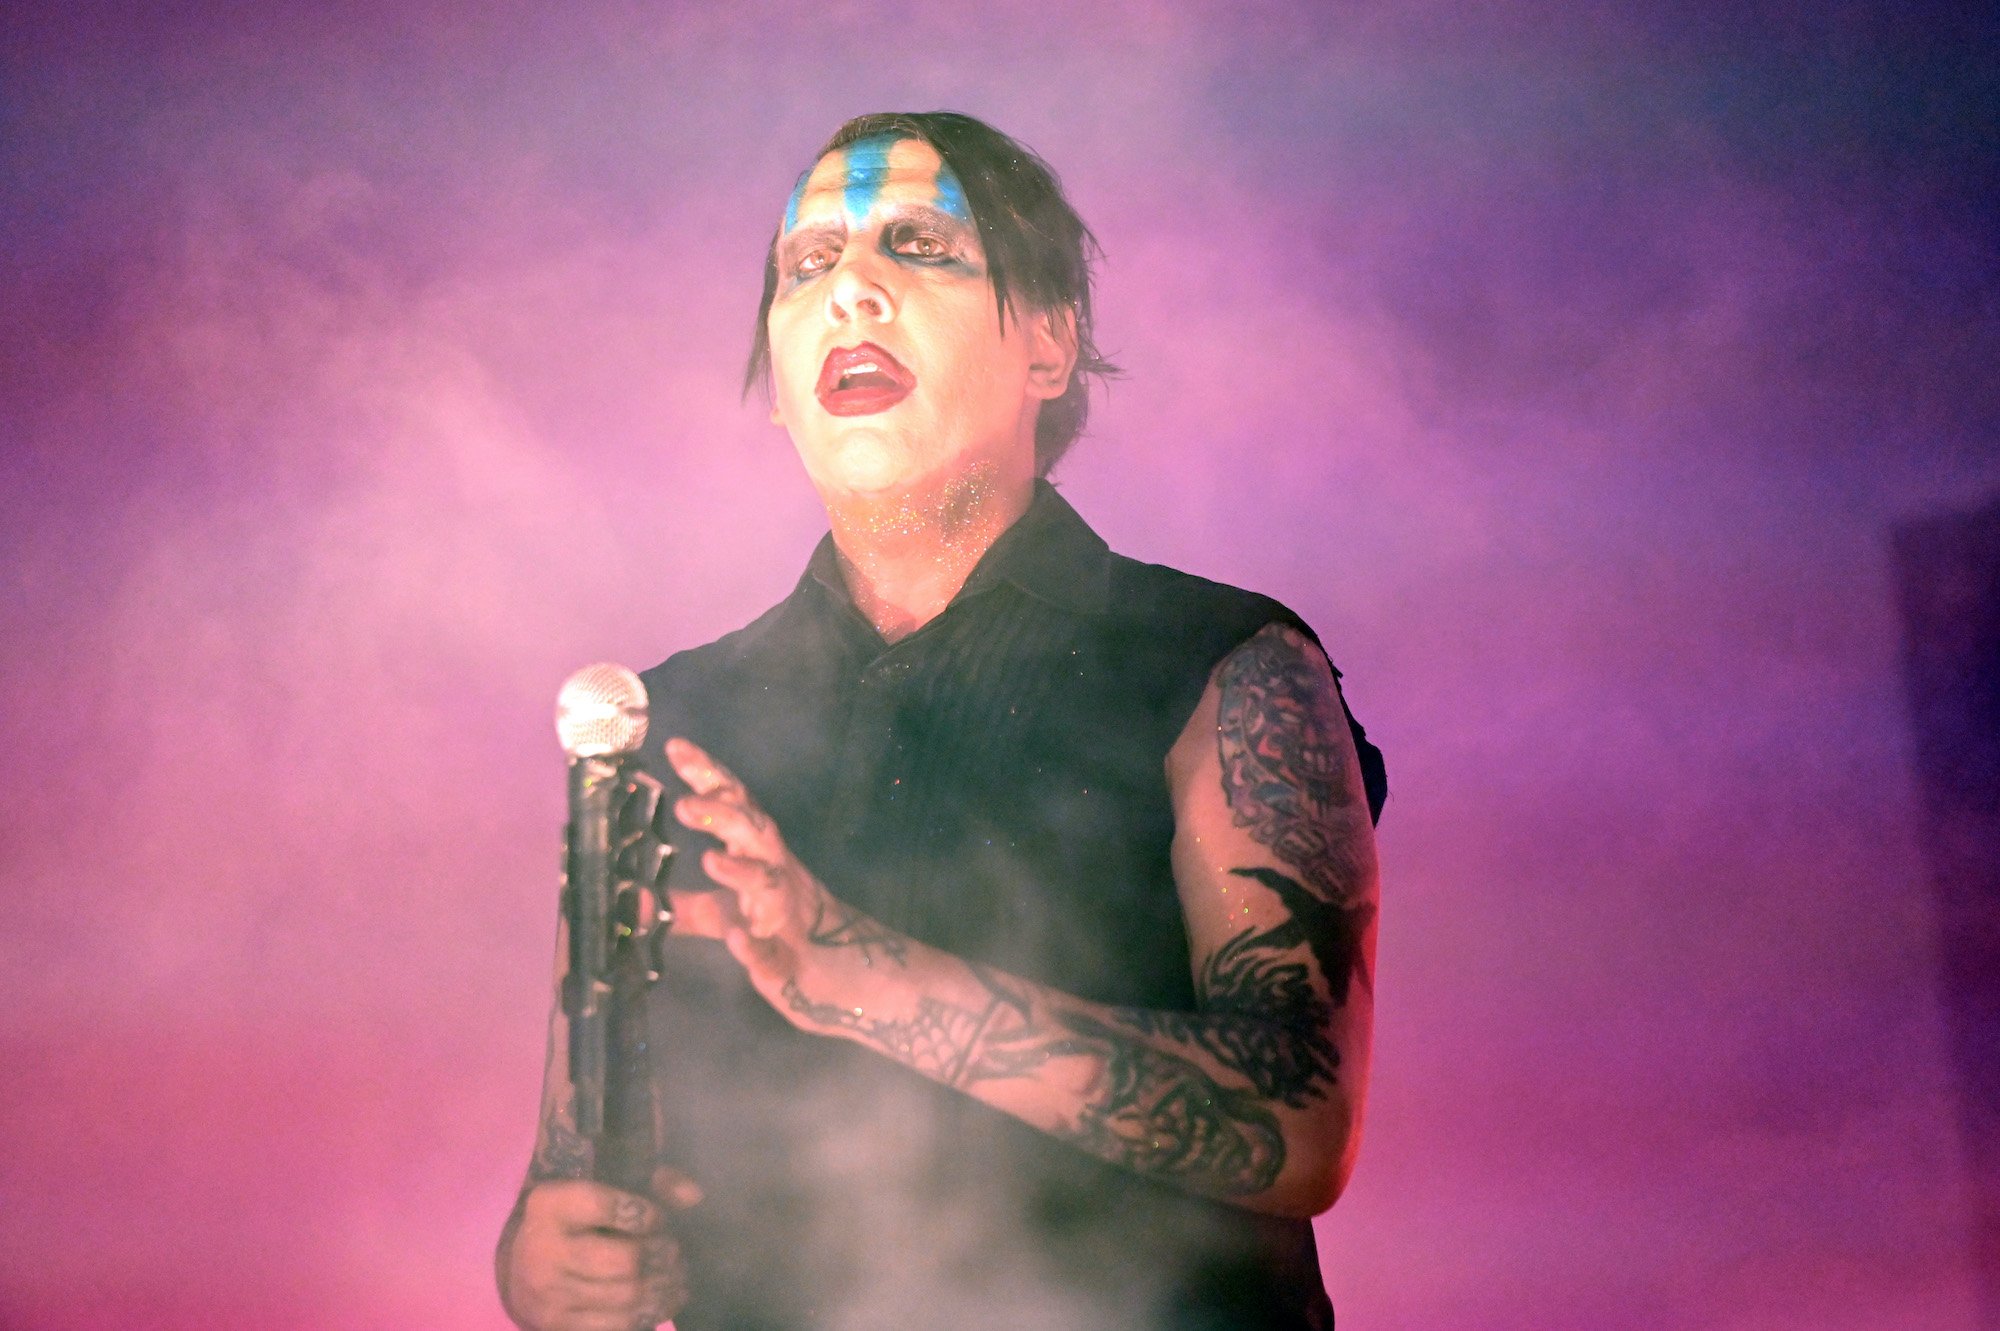 Marilyn Manson on stage in front of a pink and purple background